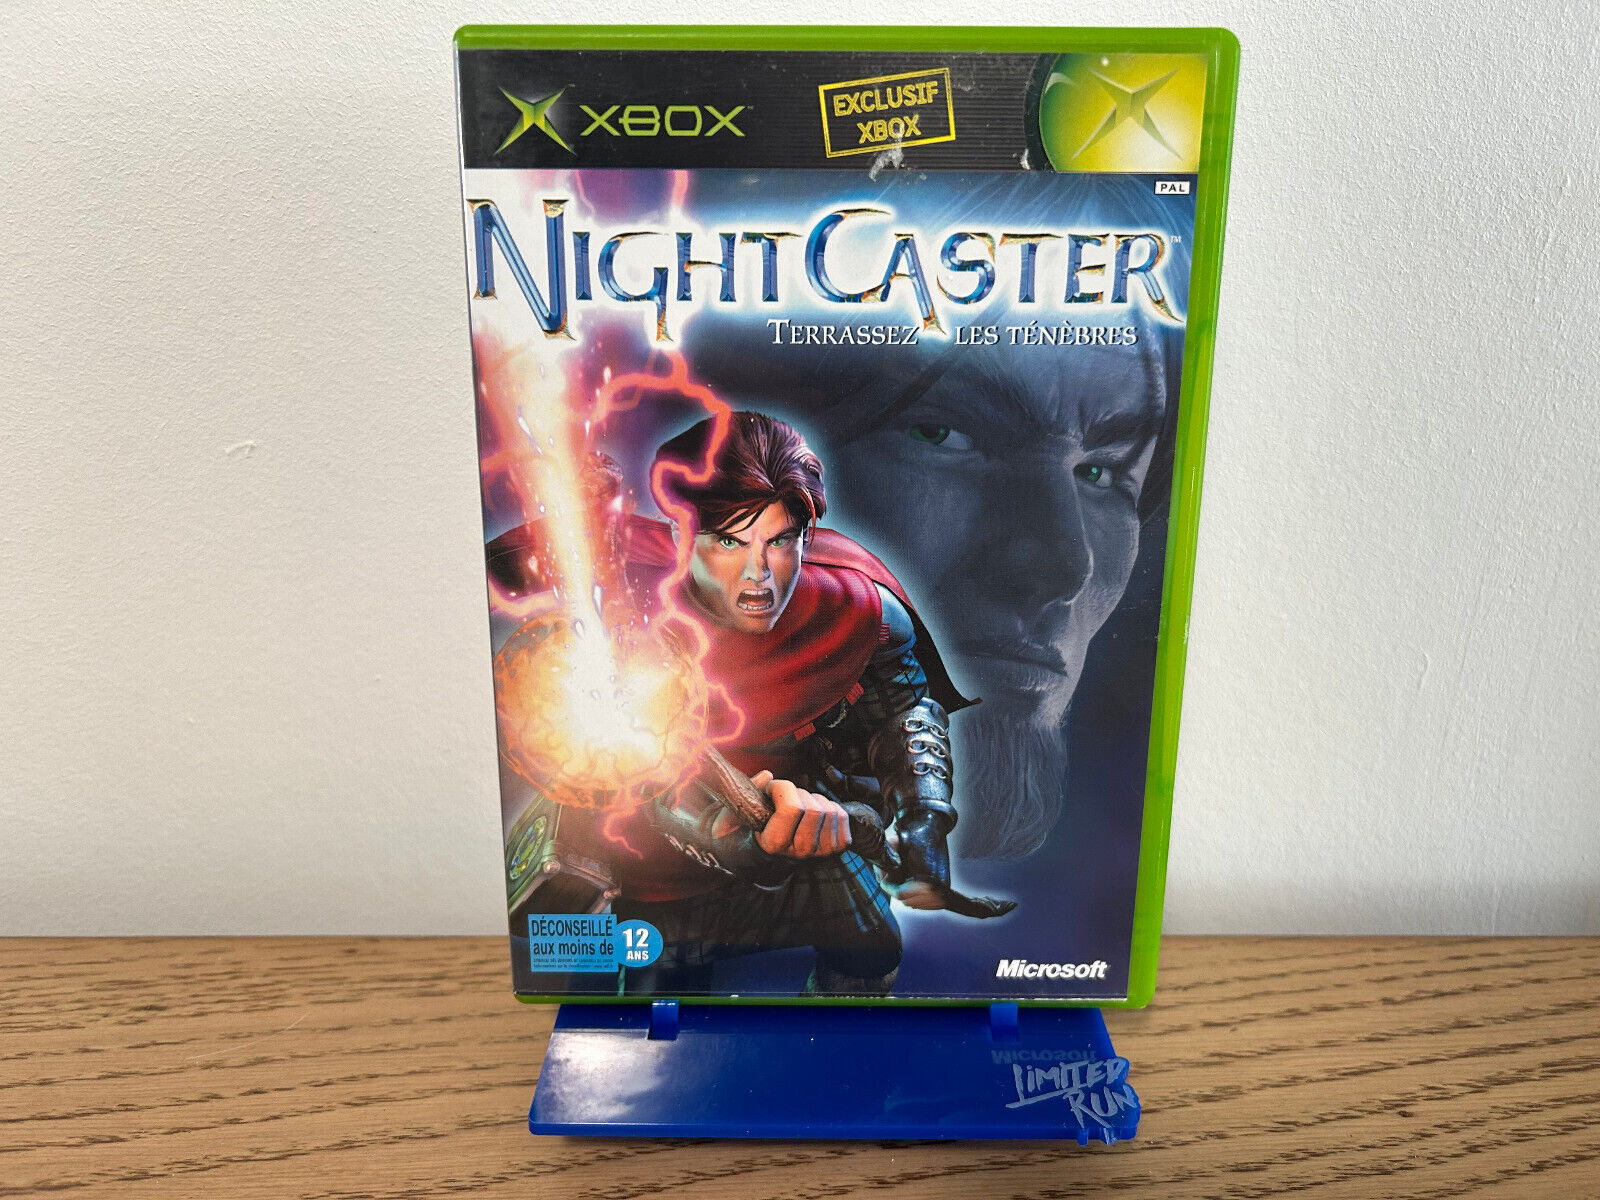 Nightcaster - Xbox 1 - PAL - Complet